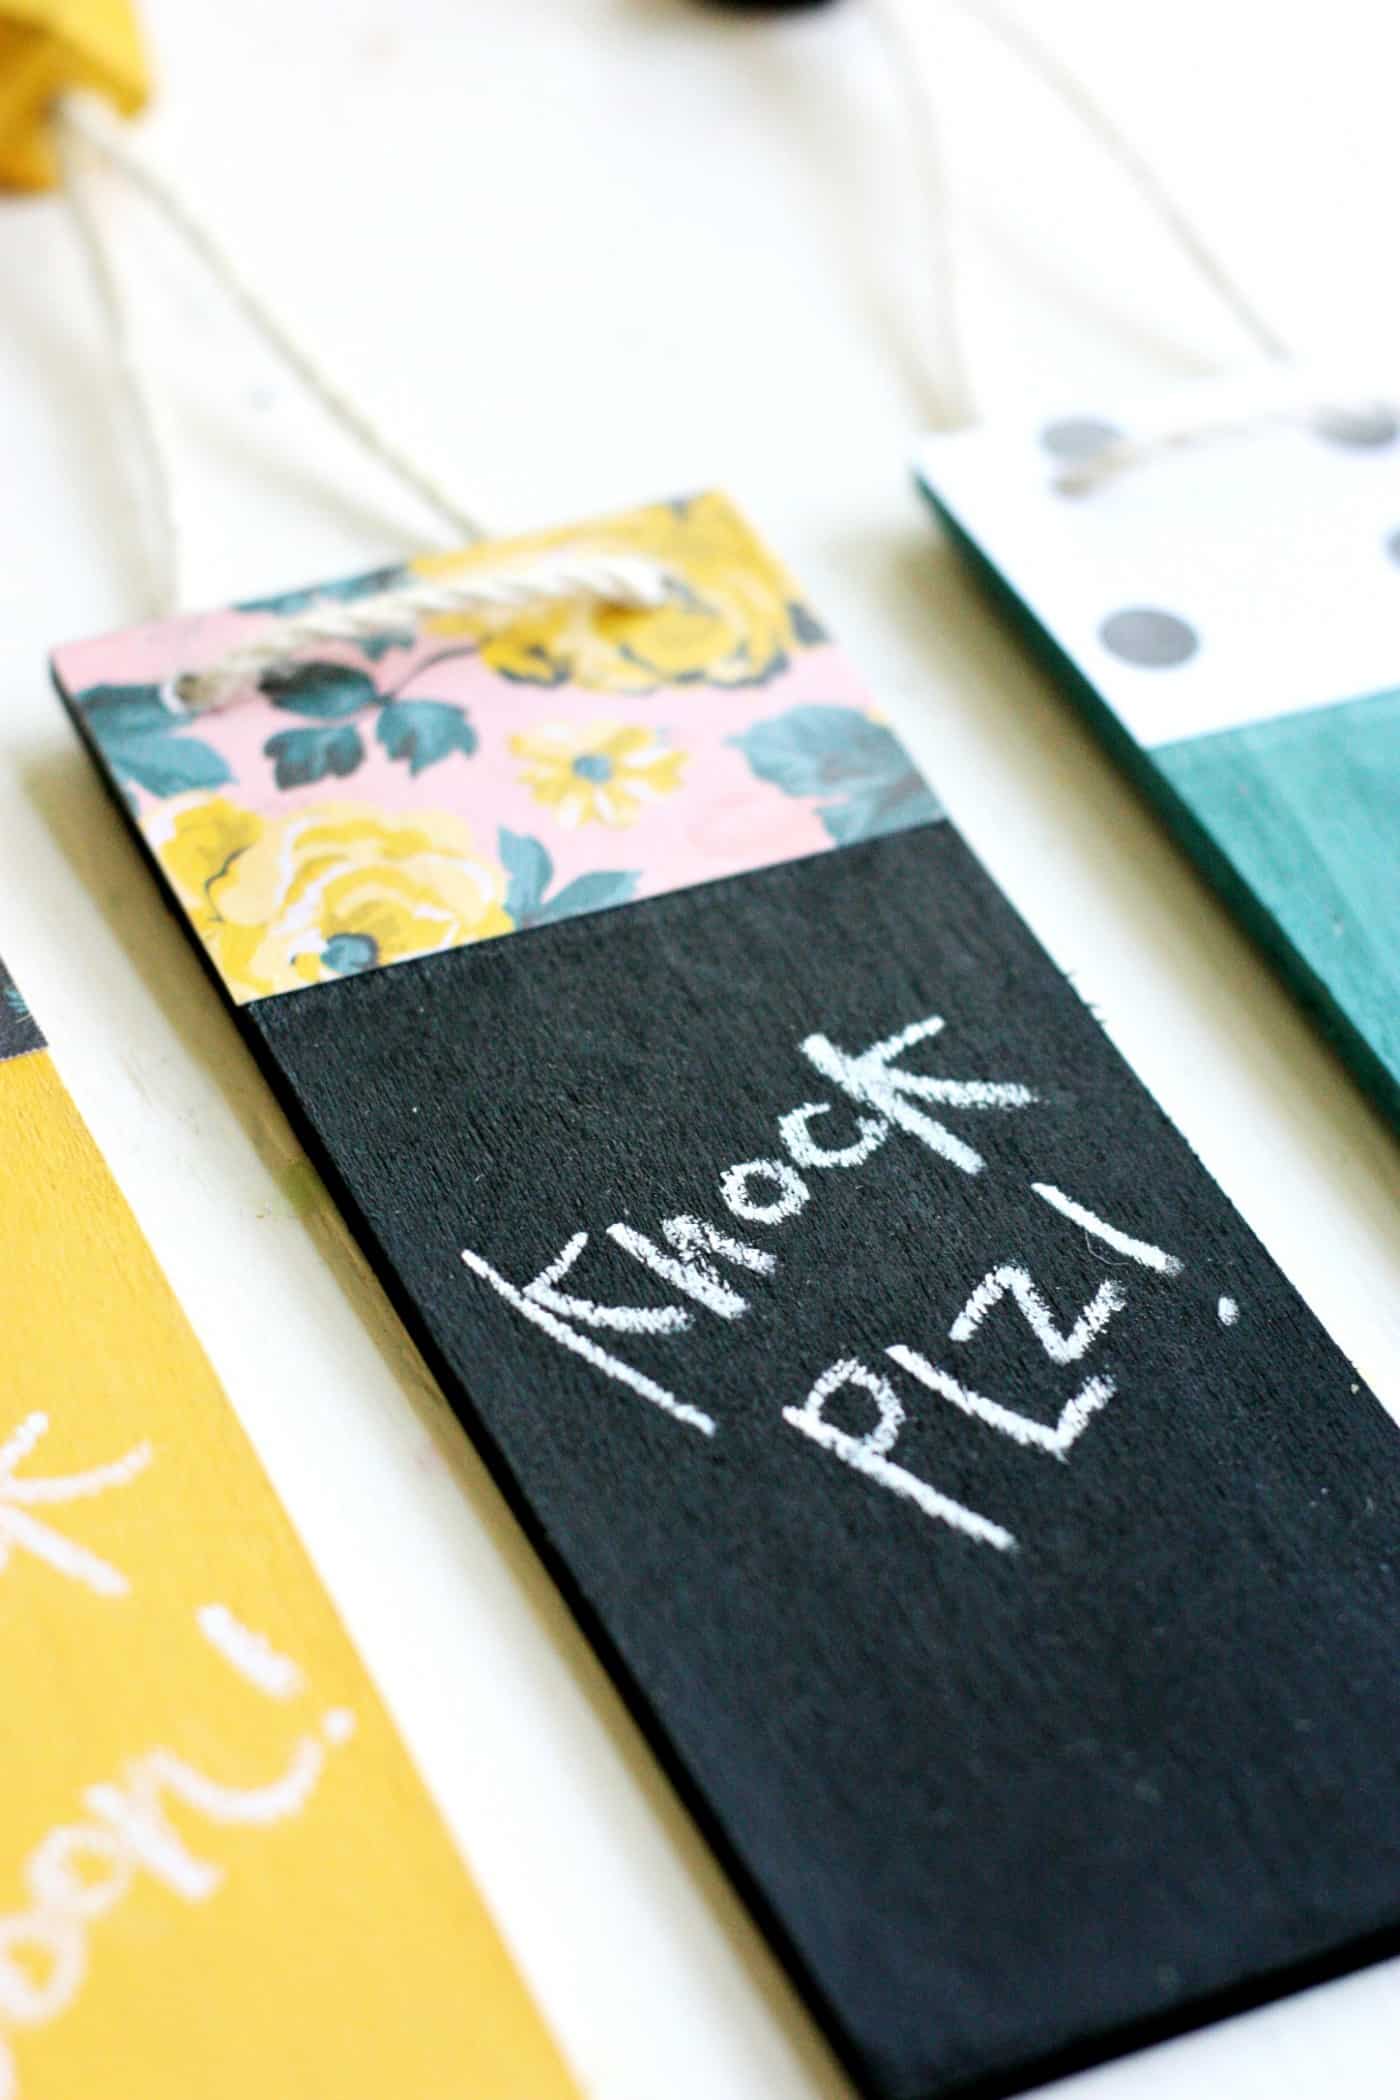 Use Mod Podge Clear Chalkboard Finish to decorate these modern door hangers! Make them in any pattern and color palette to match your decor.